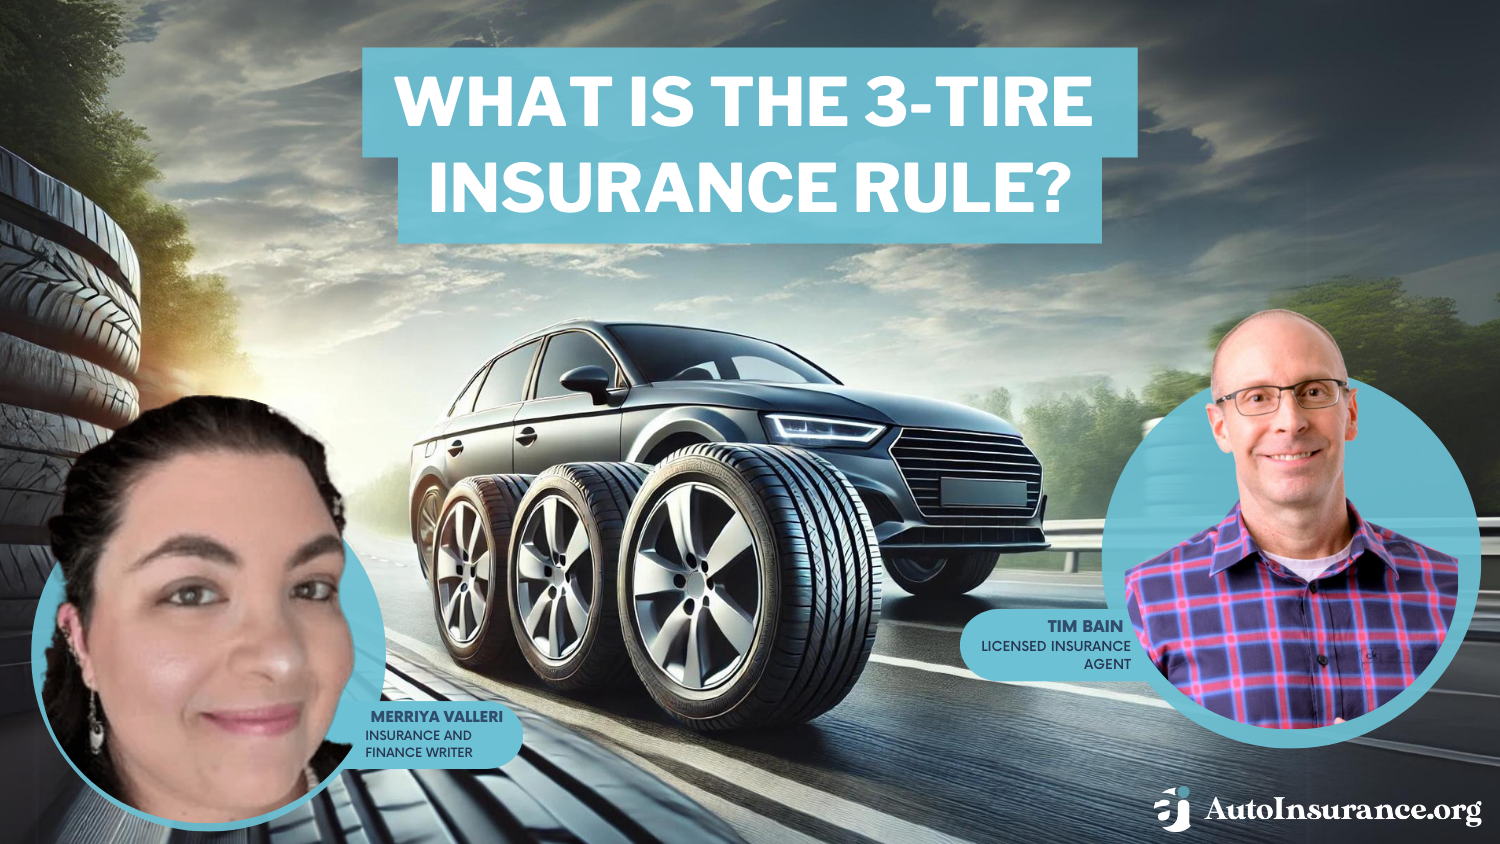 What is the 3-tire insurance rule?